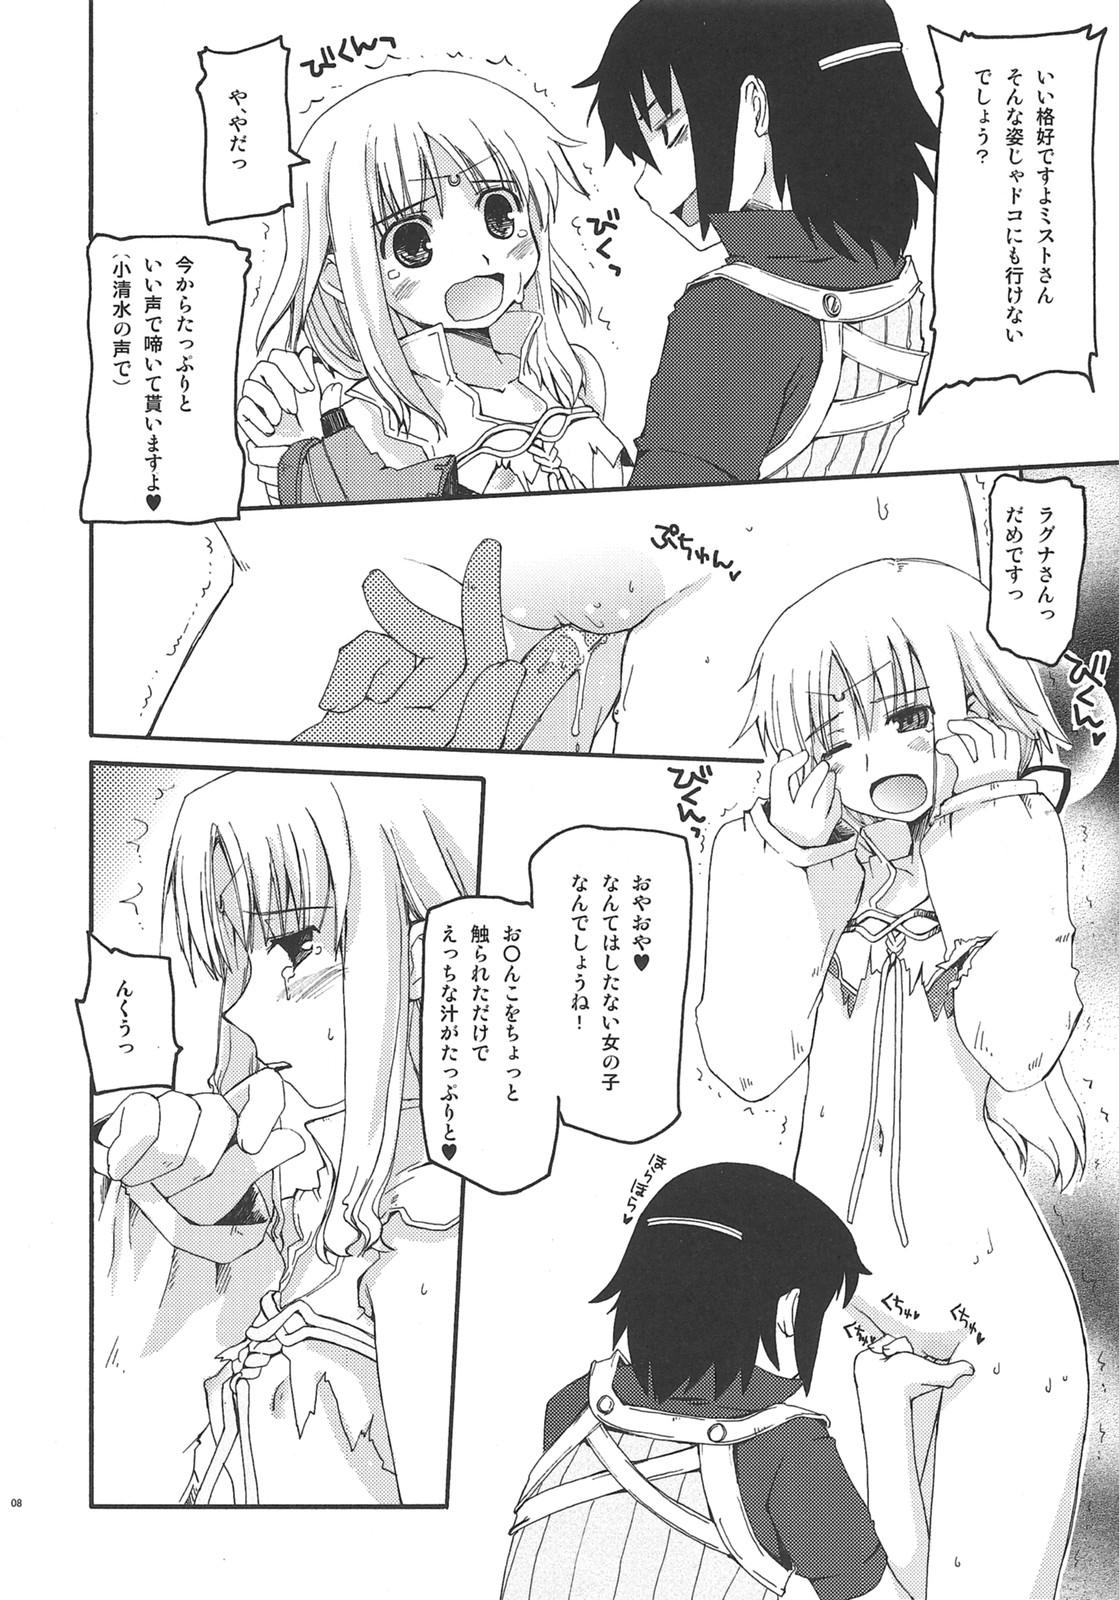 Double Blowjob Walking with strangers - Rune factory Yoga - Page 7